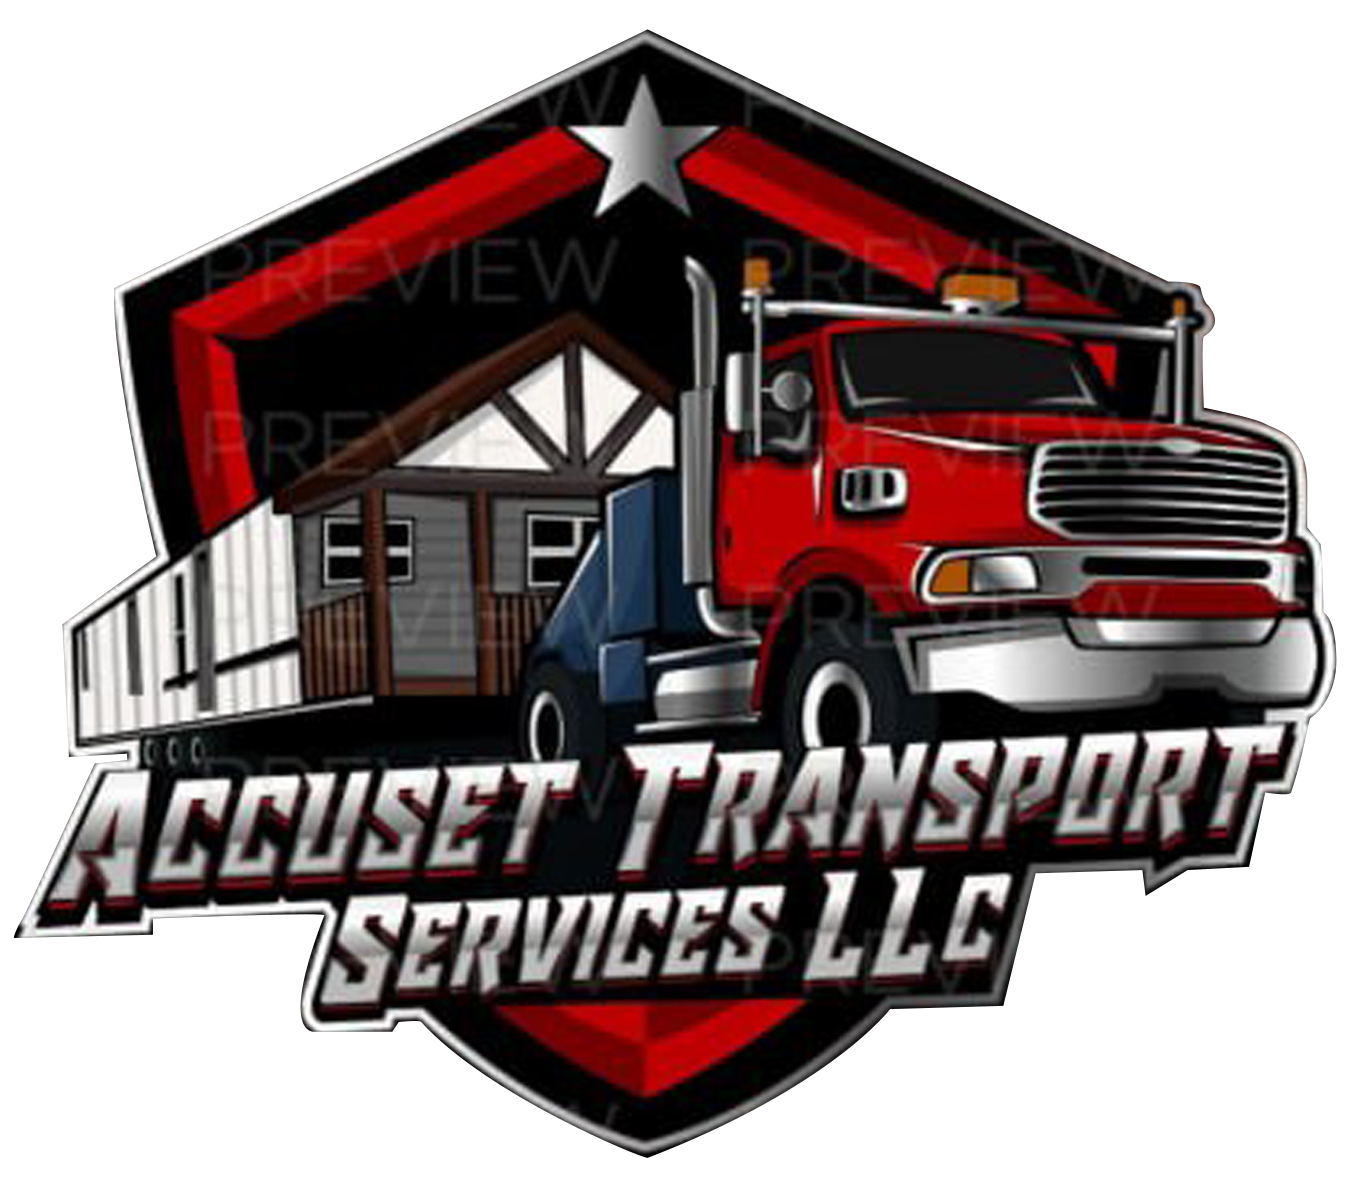 Accuset Transport Services